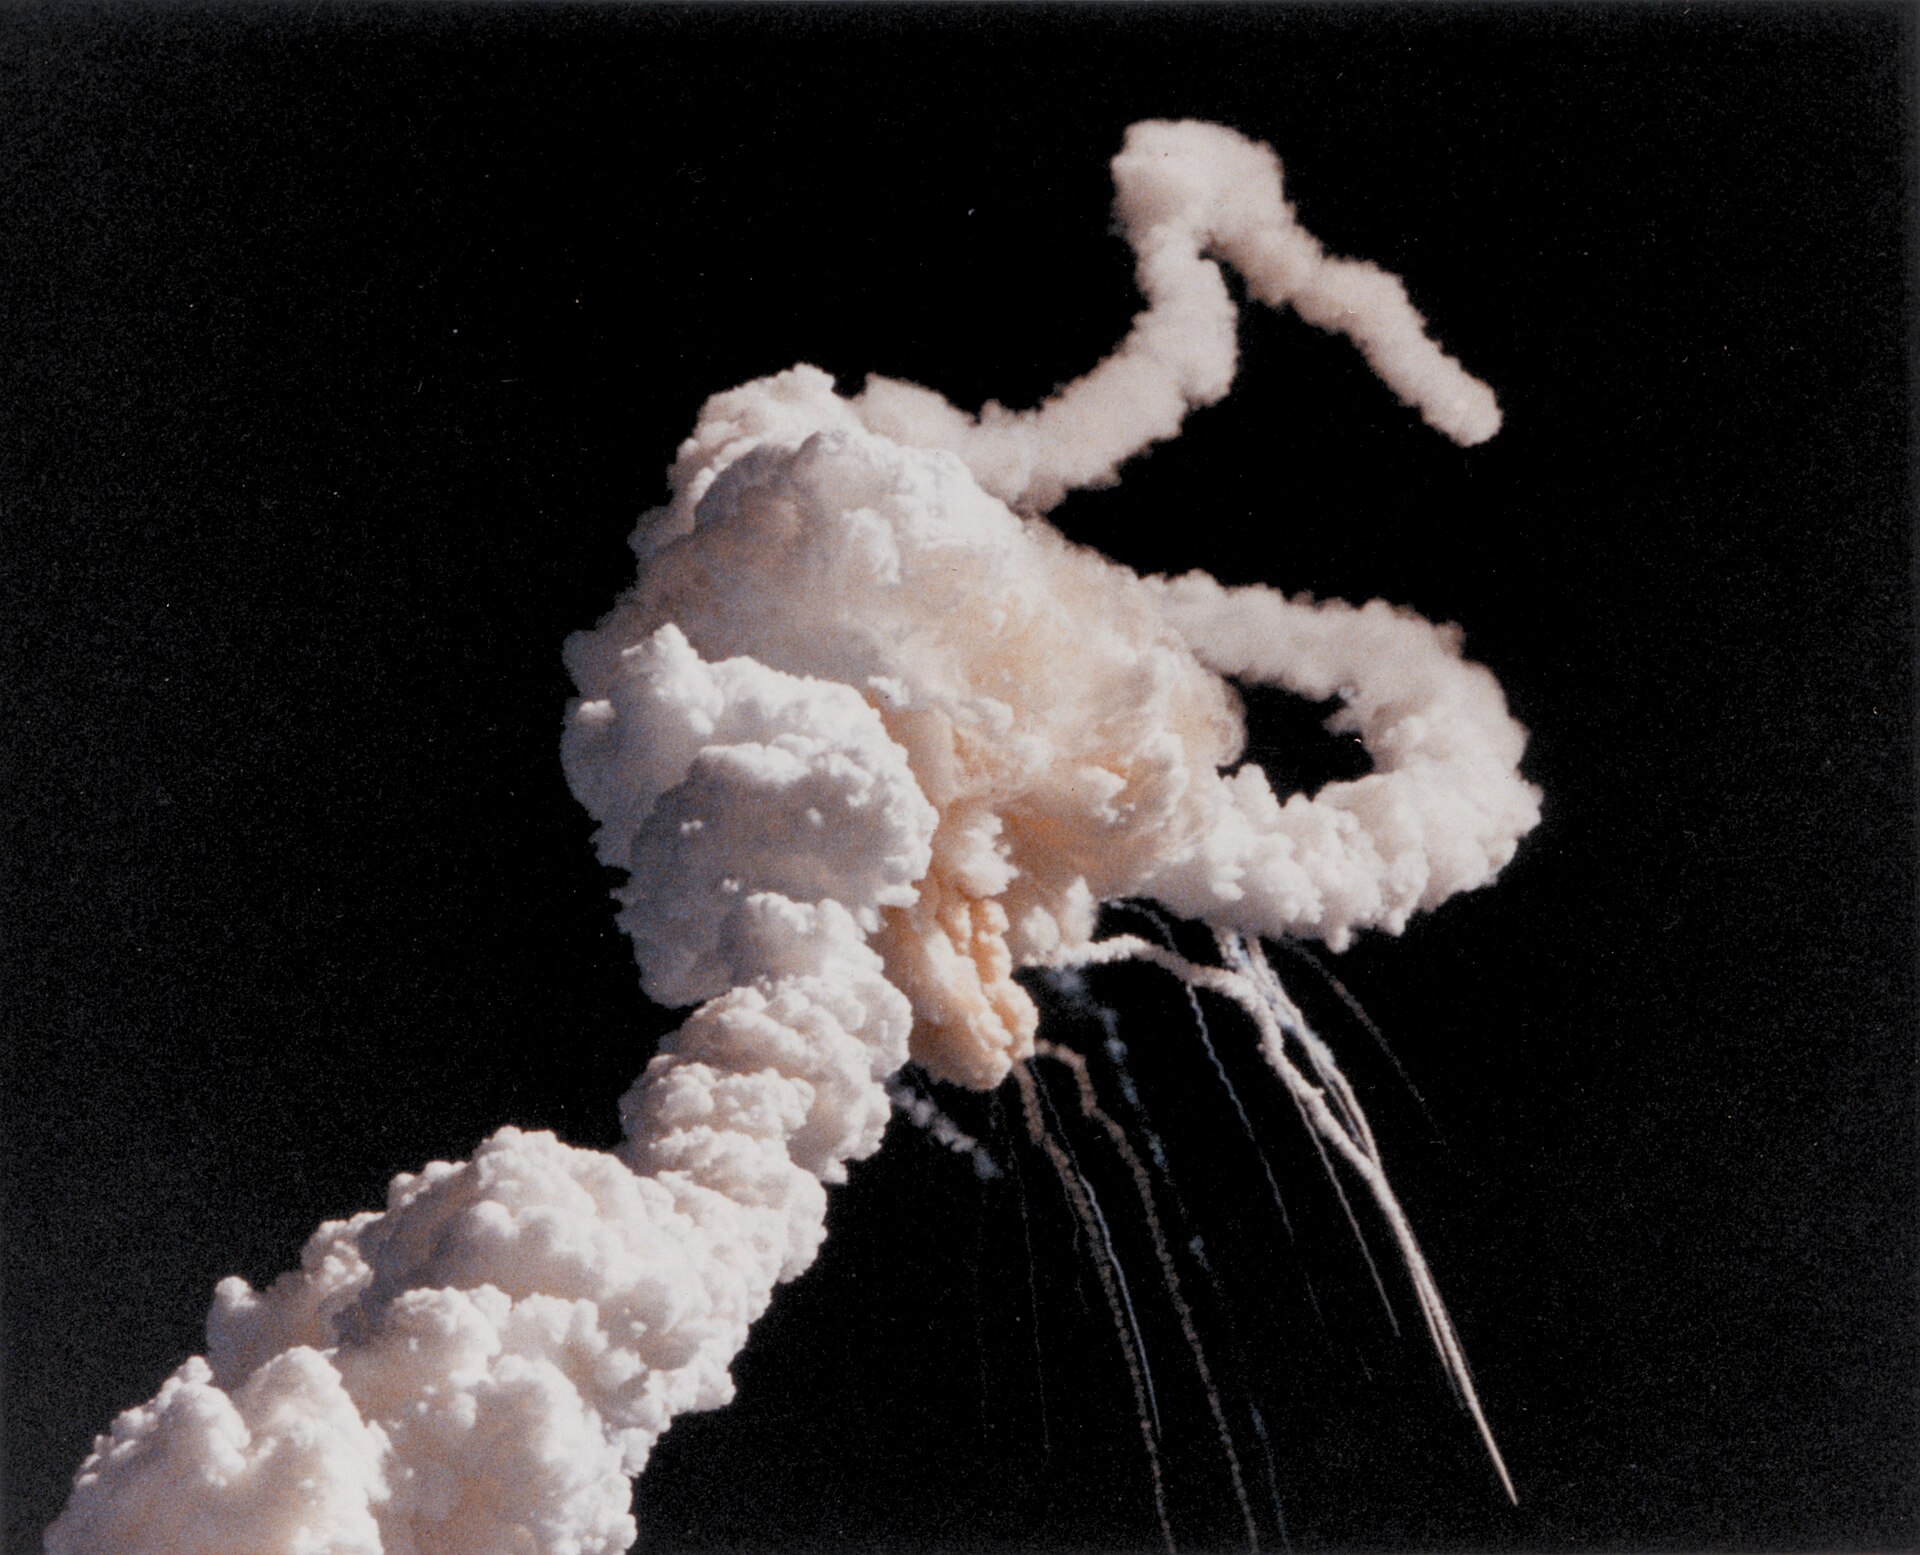 The challenger explosion